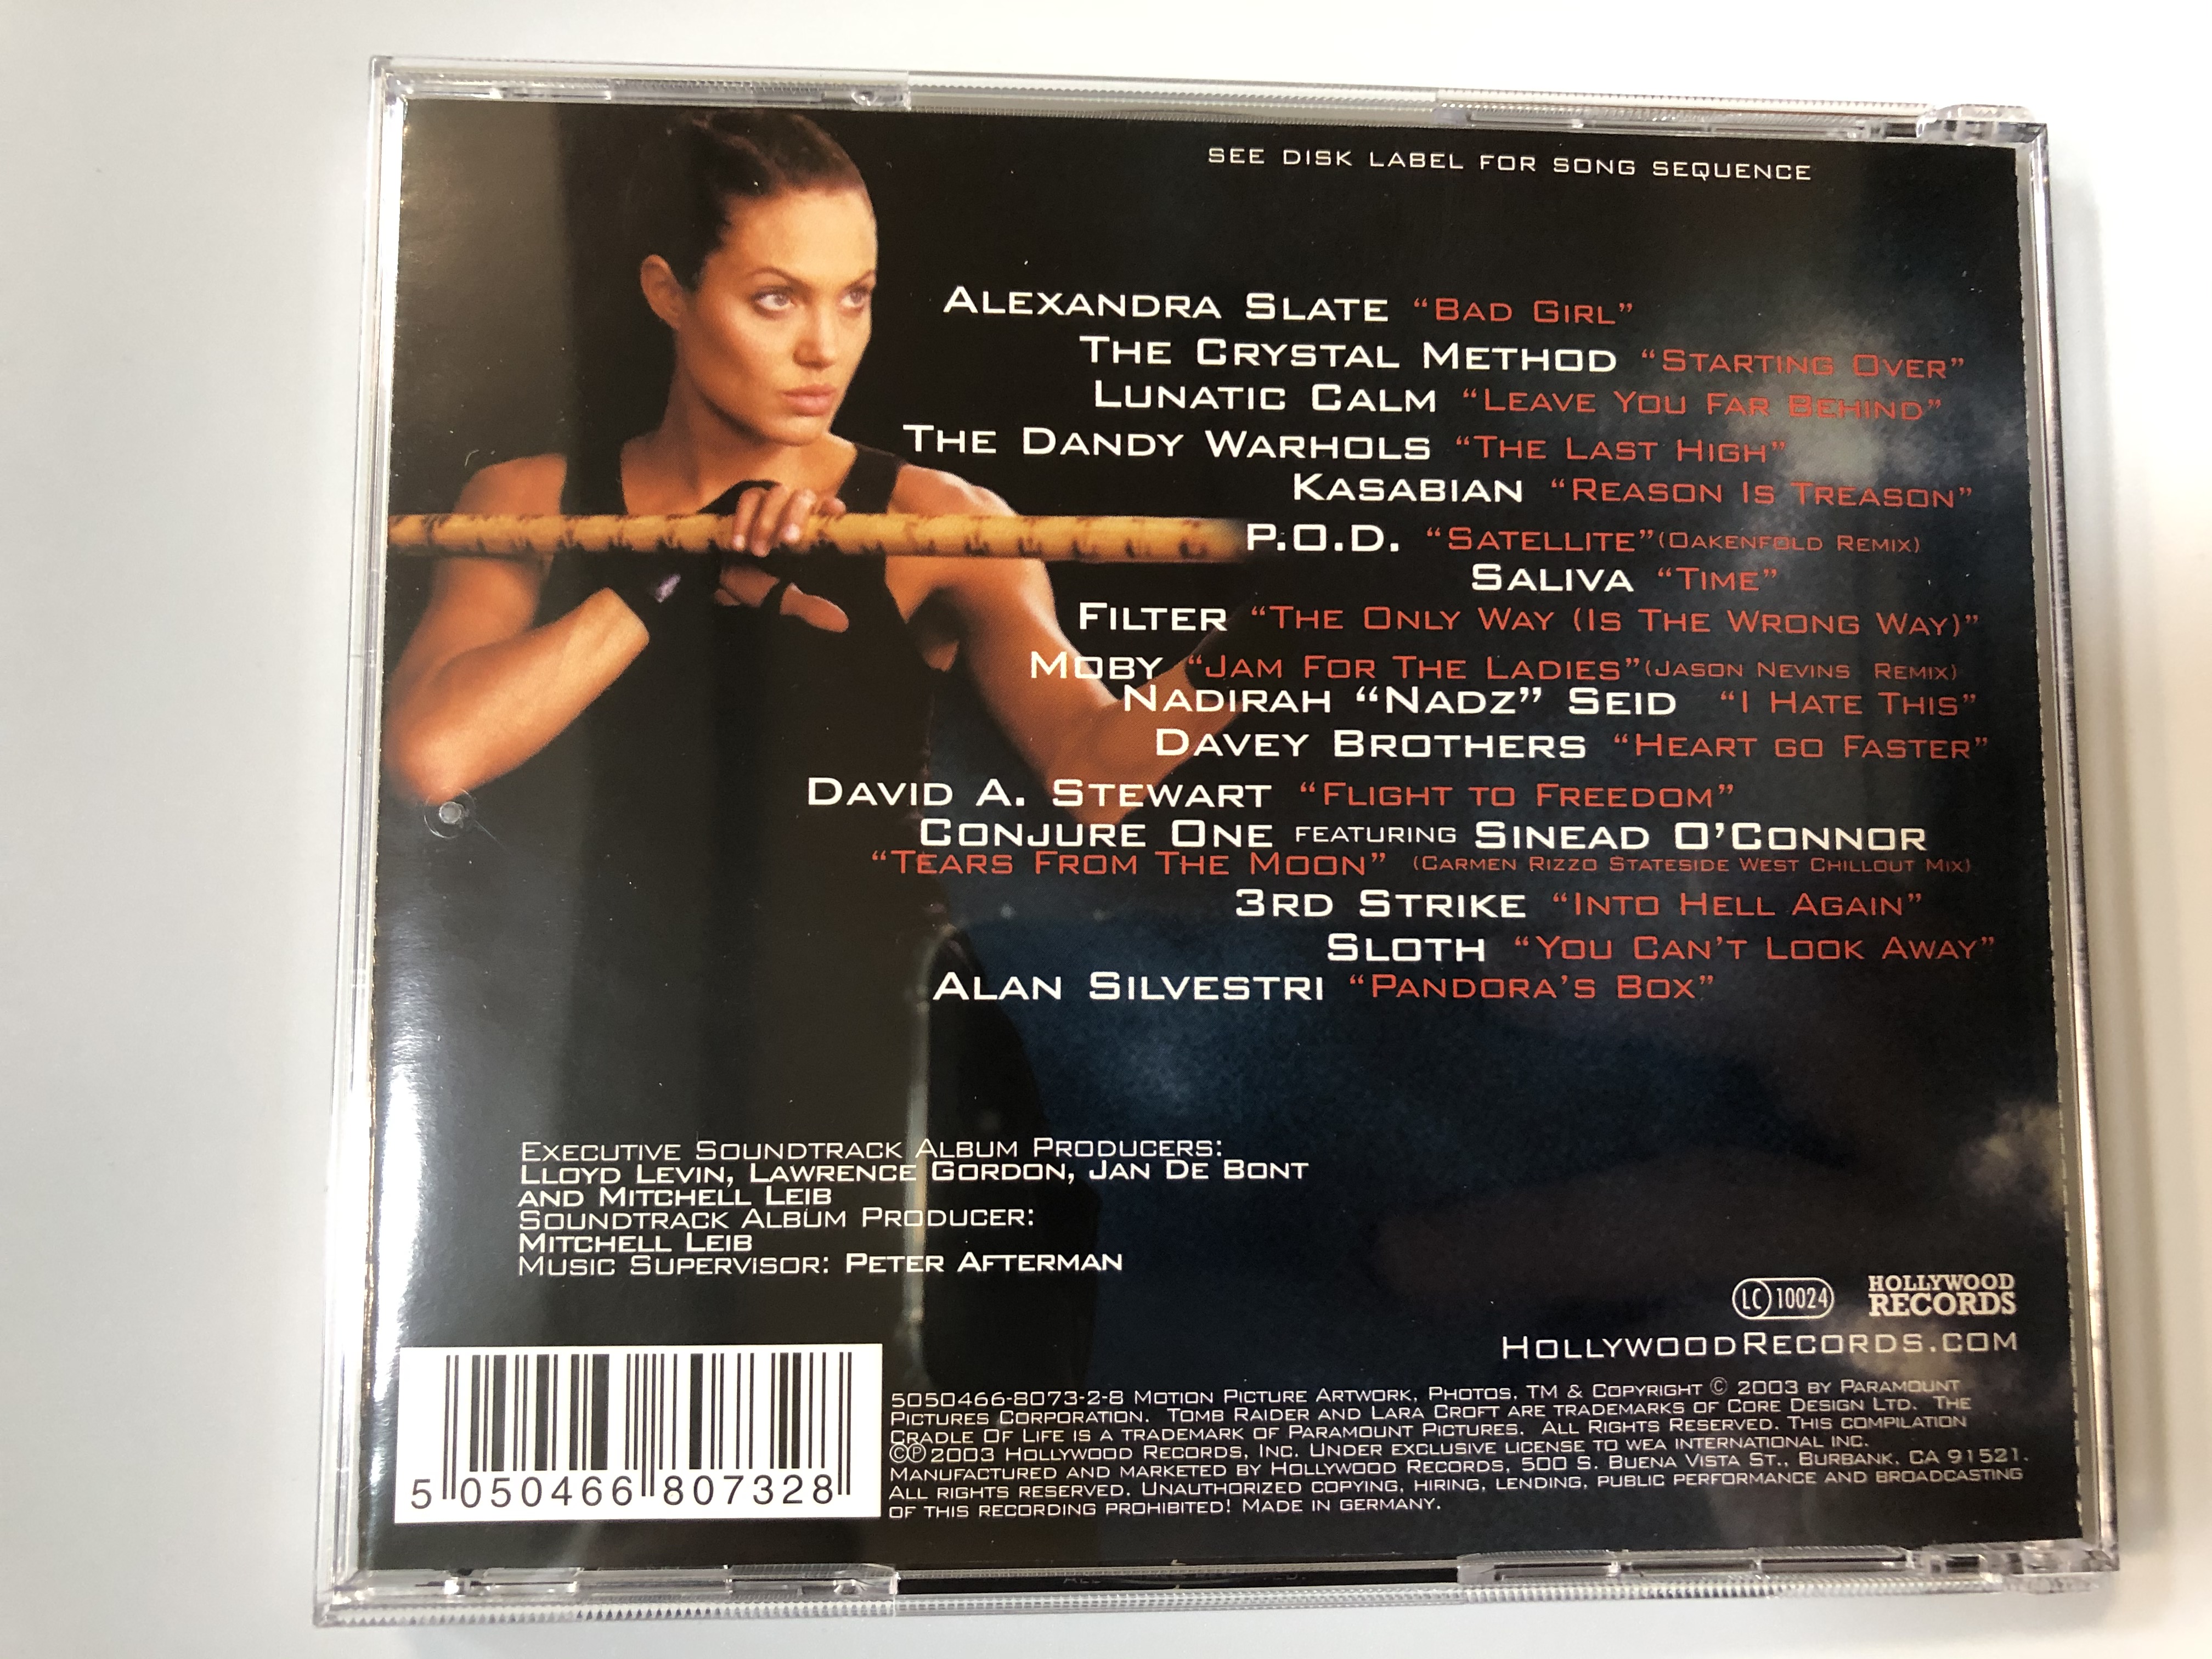 music-from-inspired-by-the-motion-picture-lara-croft-tomb-raider-the-cradle-of-life-hollywood-records-audio-cd-2003-5050466-8073-2-8-2-.jpg